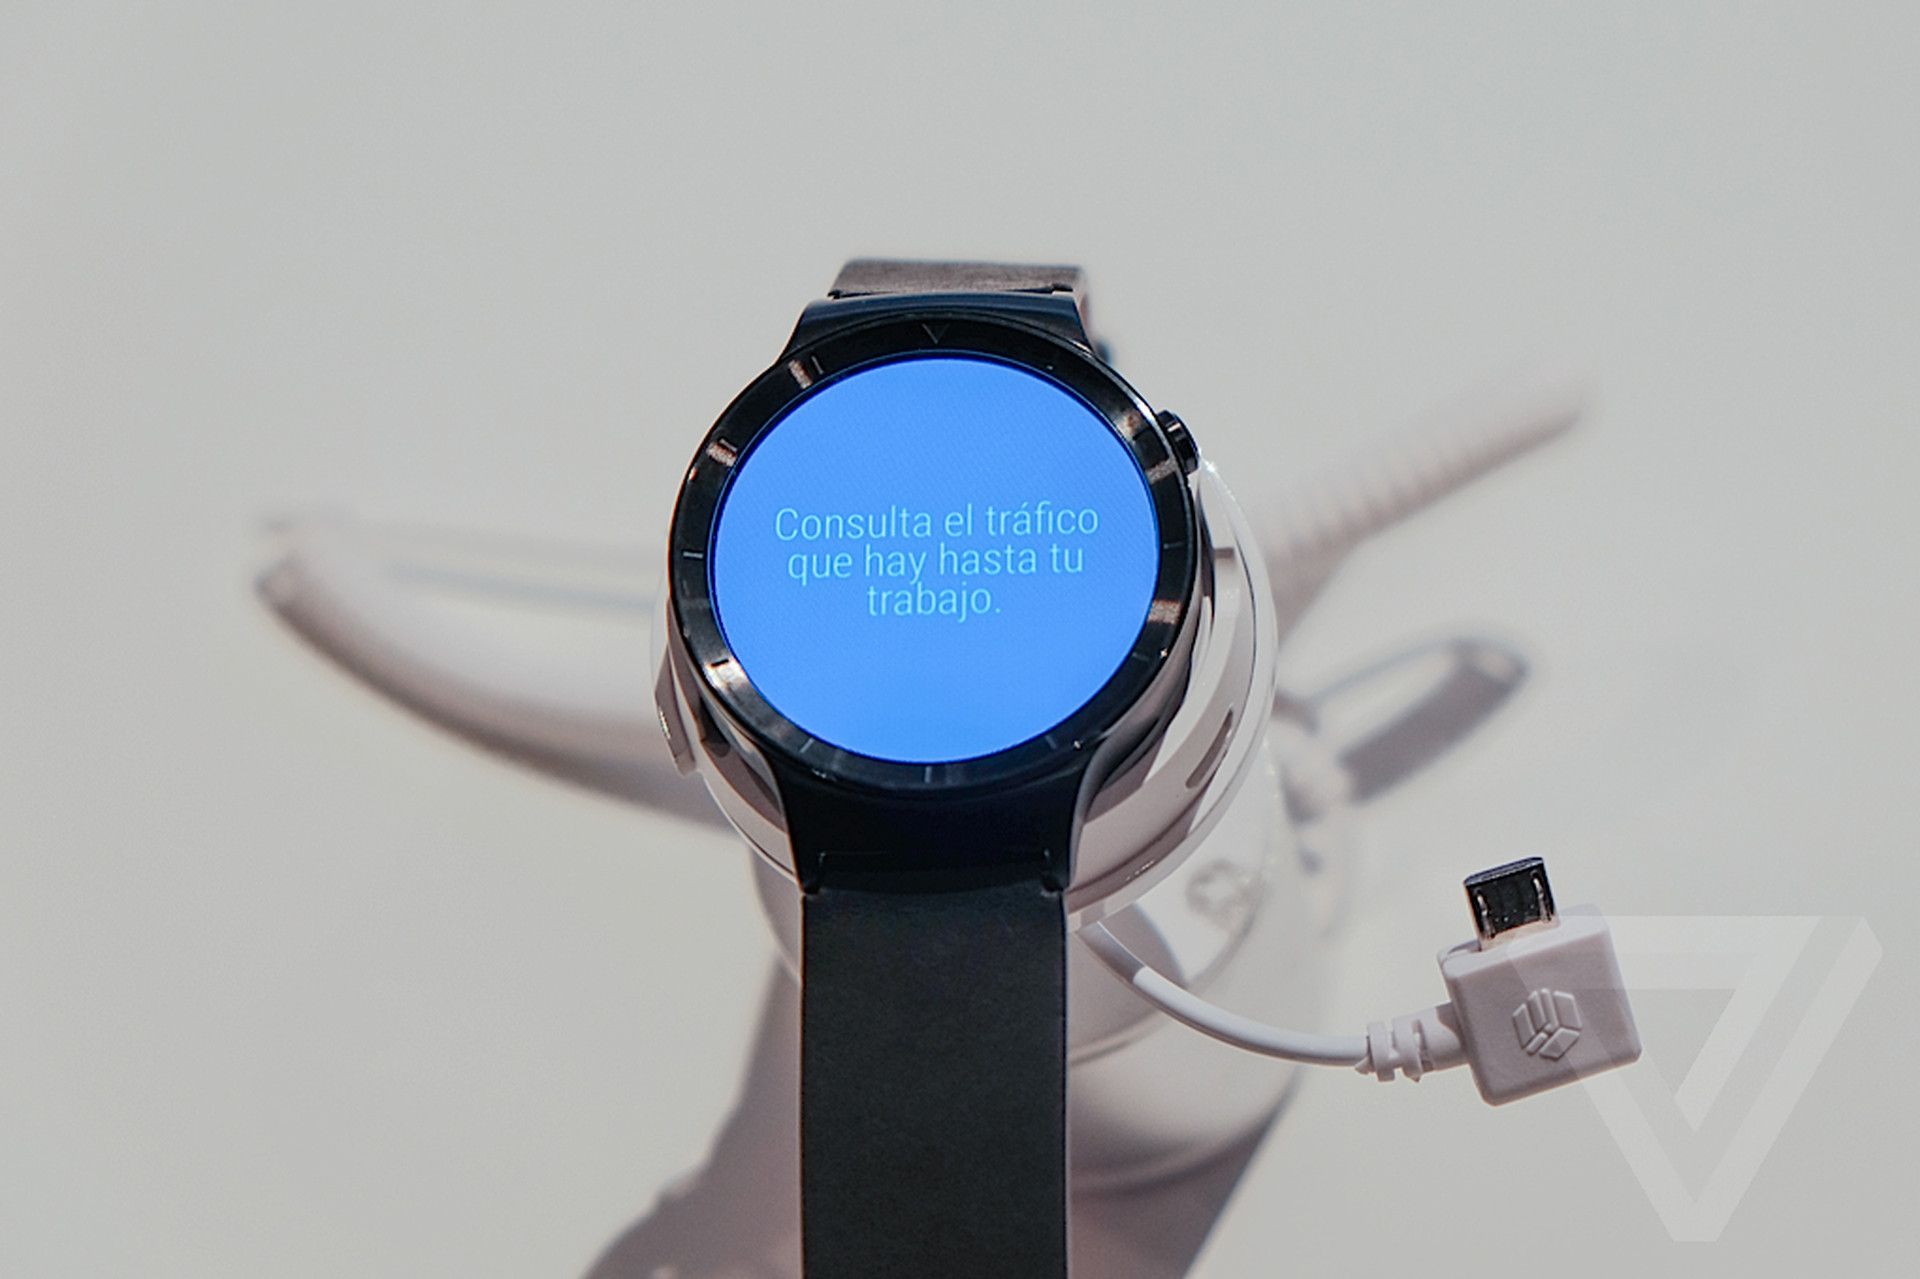 The Huawei Watch is the most watch-like Android smartwatch yet - The Verge